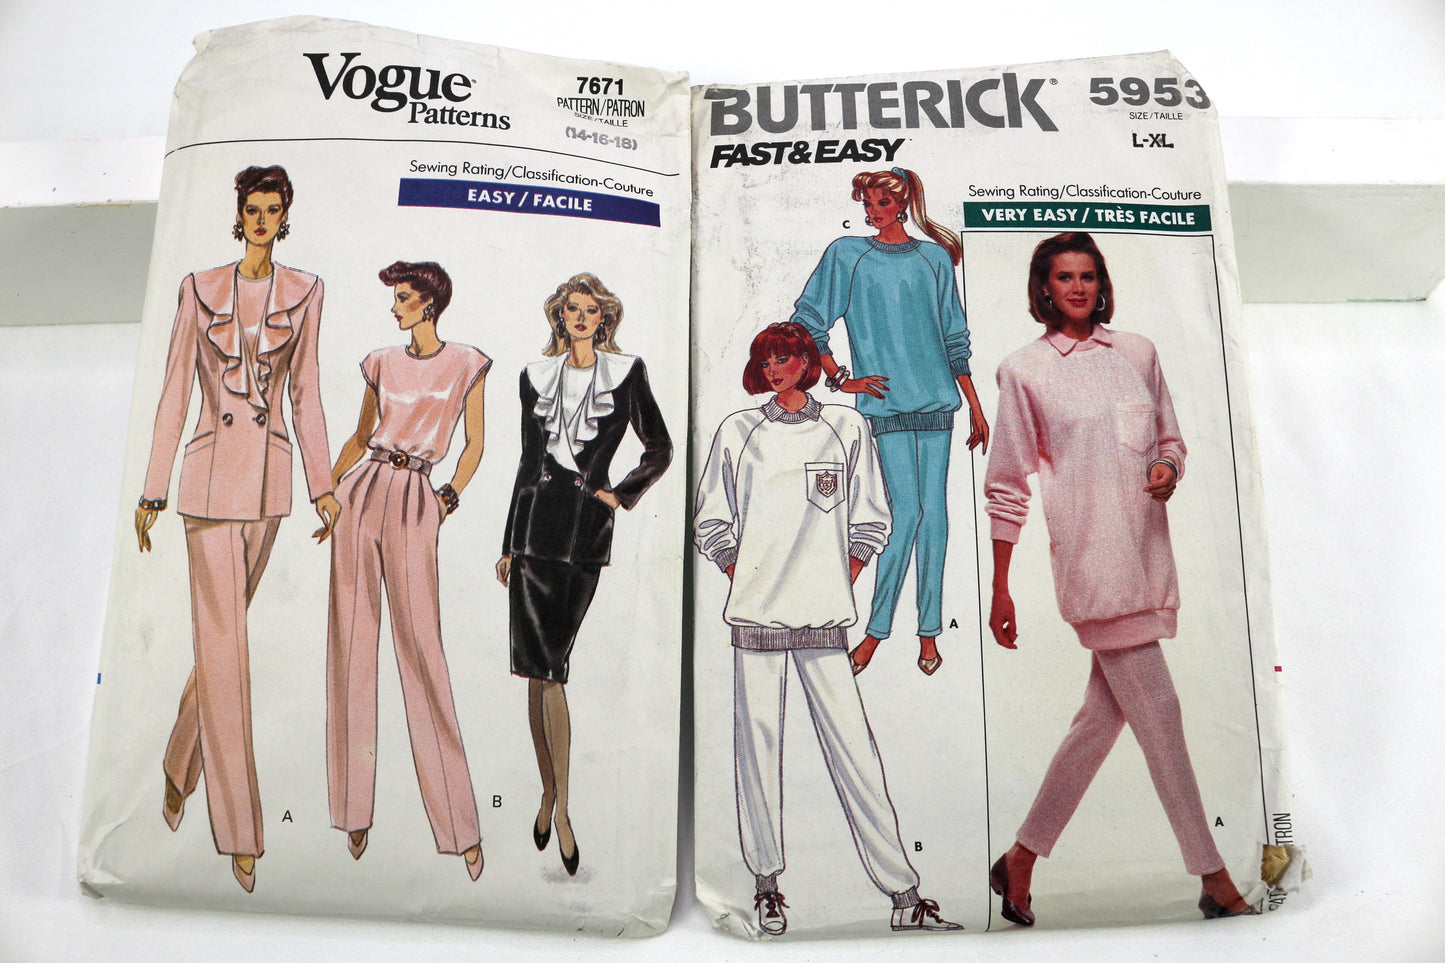 Vogue 7671 Couture Womens Sewing Pattern or Butterick 5953 Petite Womens Top & Pants Sewing Pattern